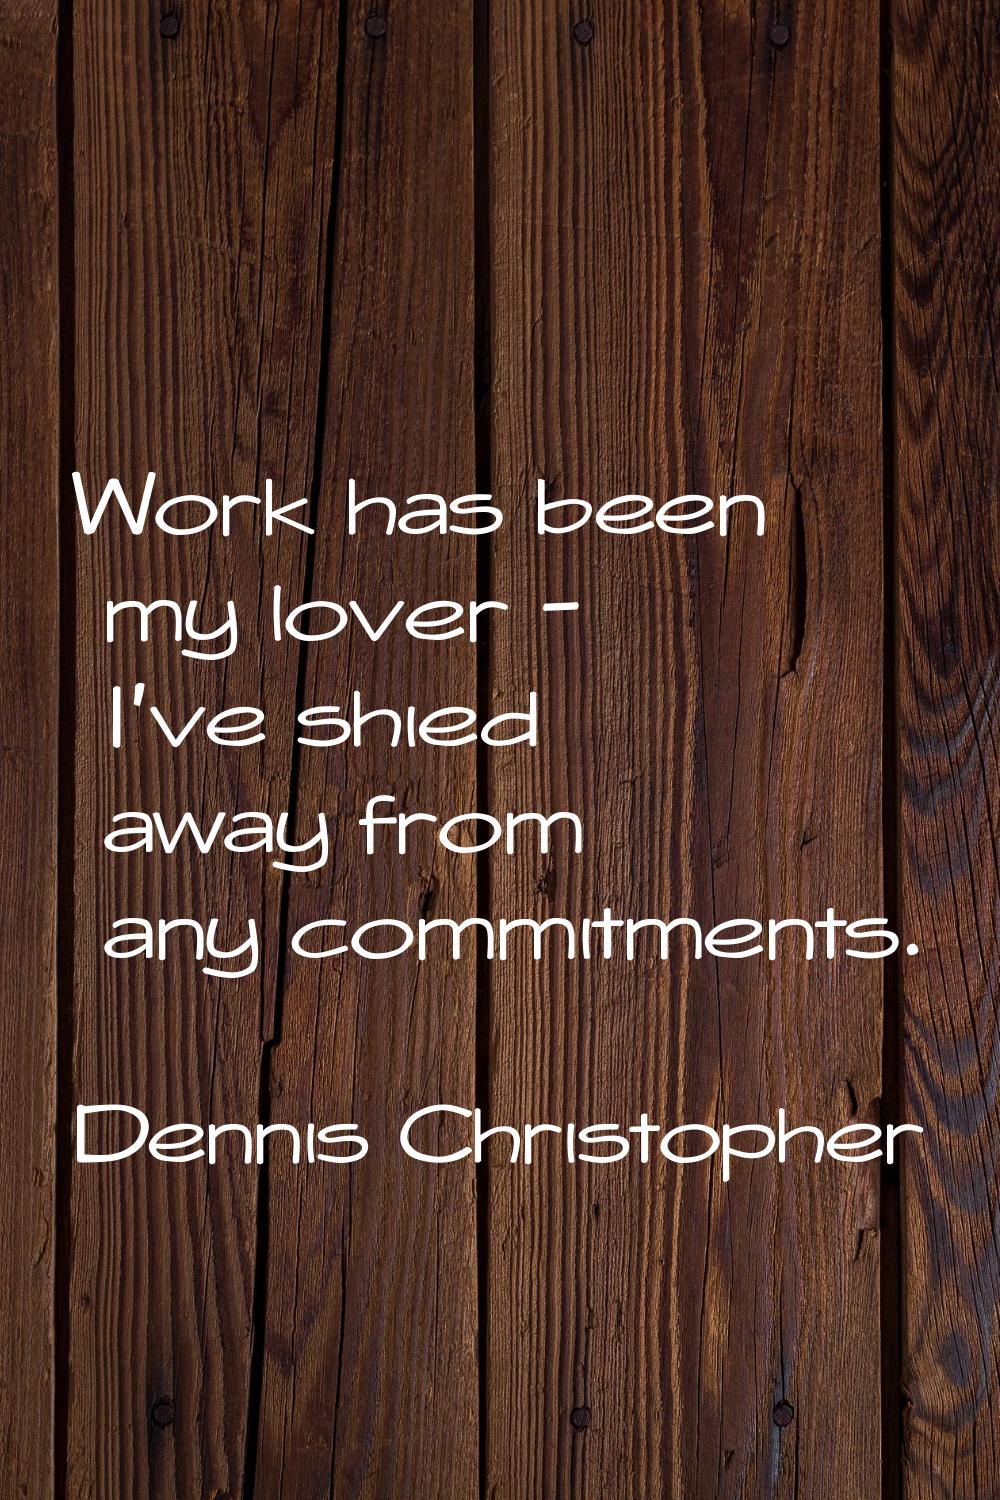 Work has been my lover - I've shied away from any commitments.